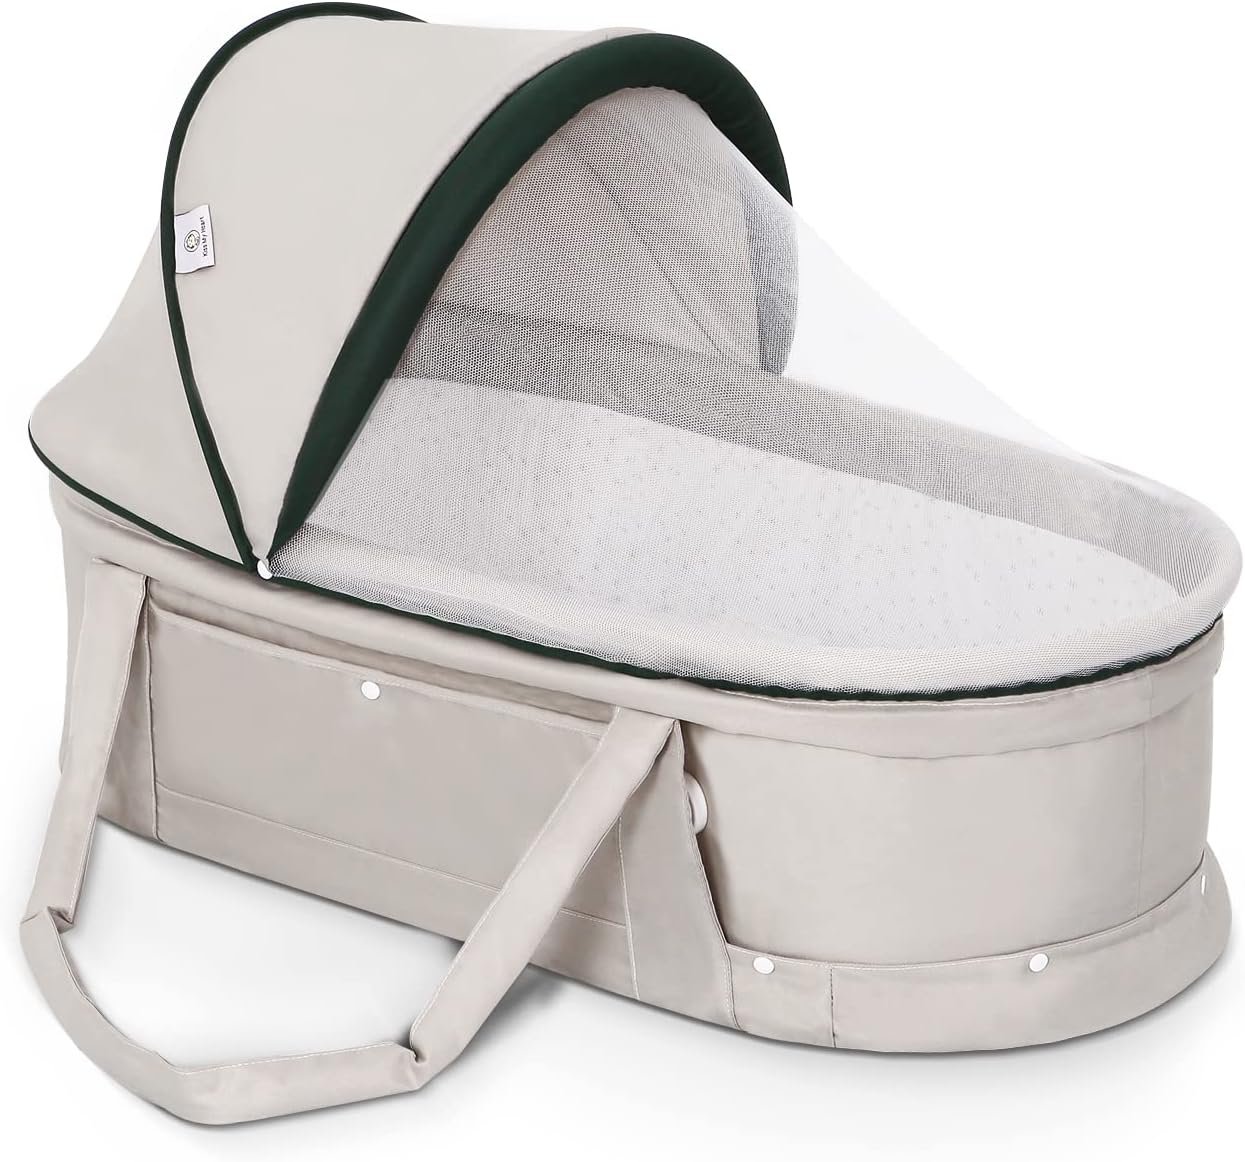 Baby Travel Bassinet Review